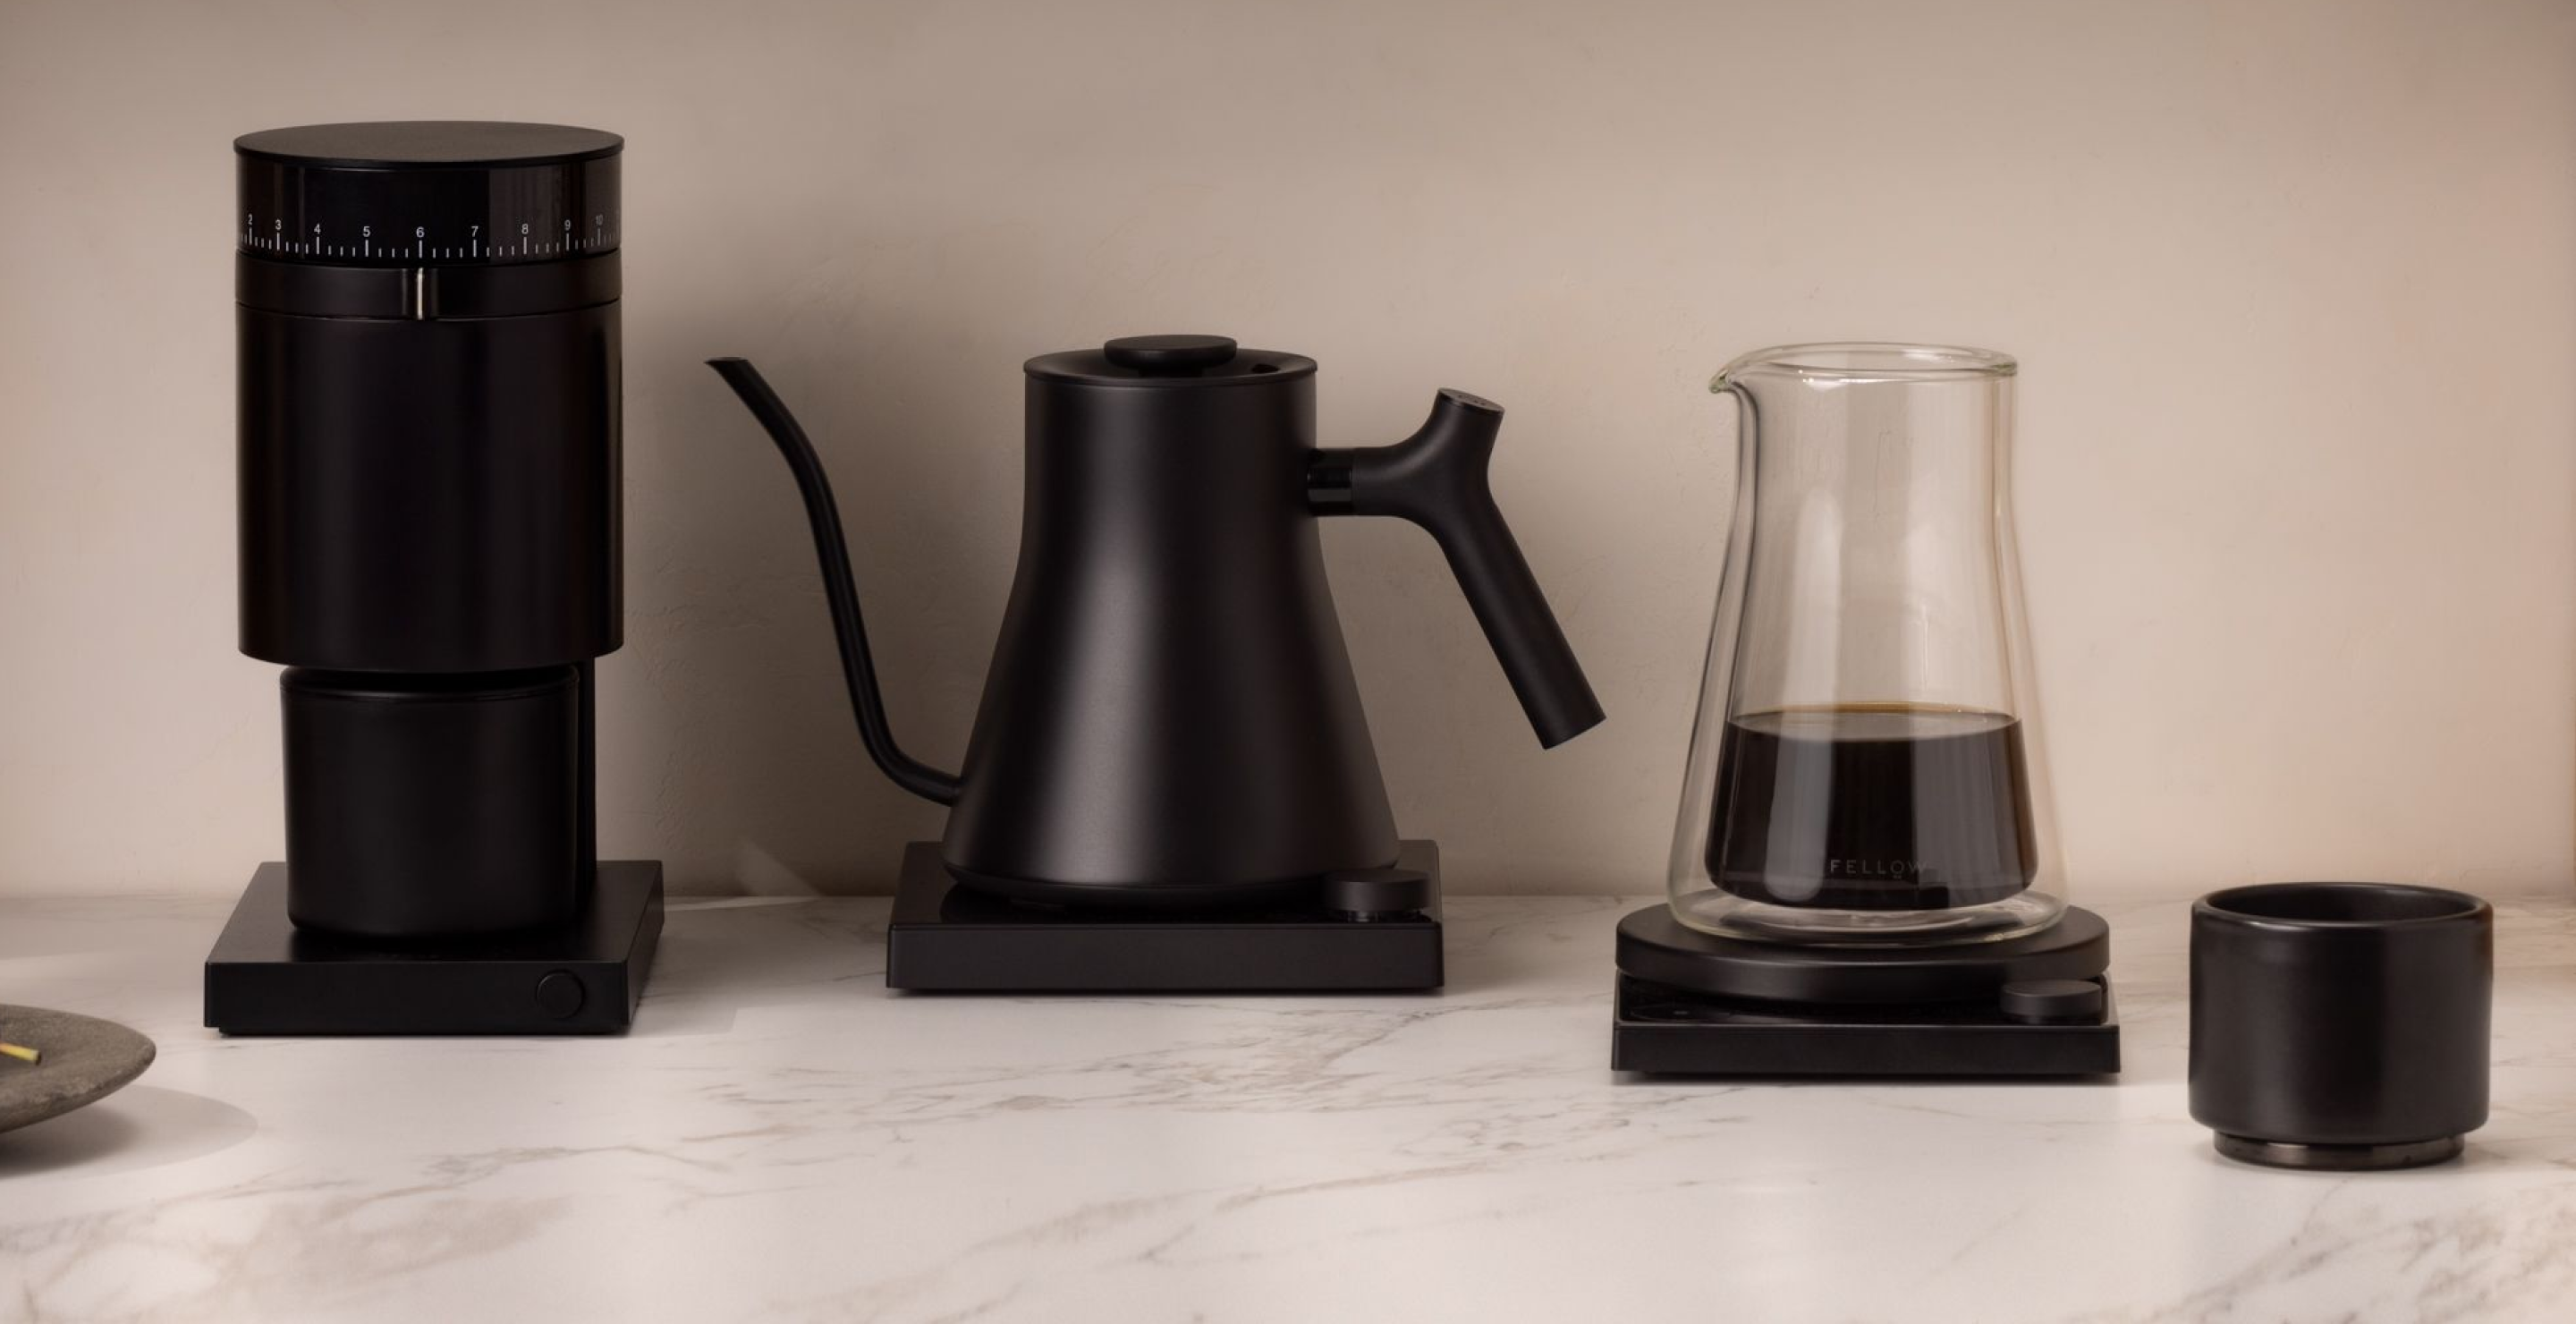 Coffee nerds, behold - Govee's smart kettle is now $20 off in this early  Black Friday deal